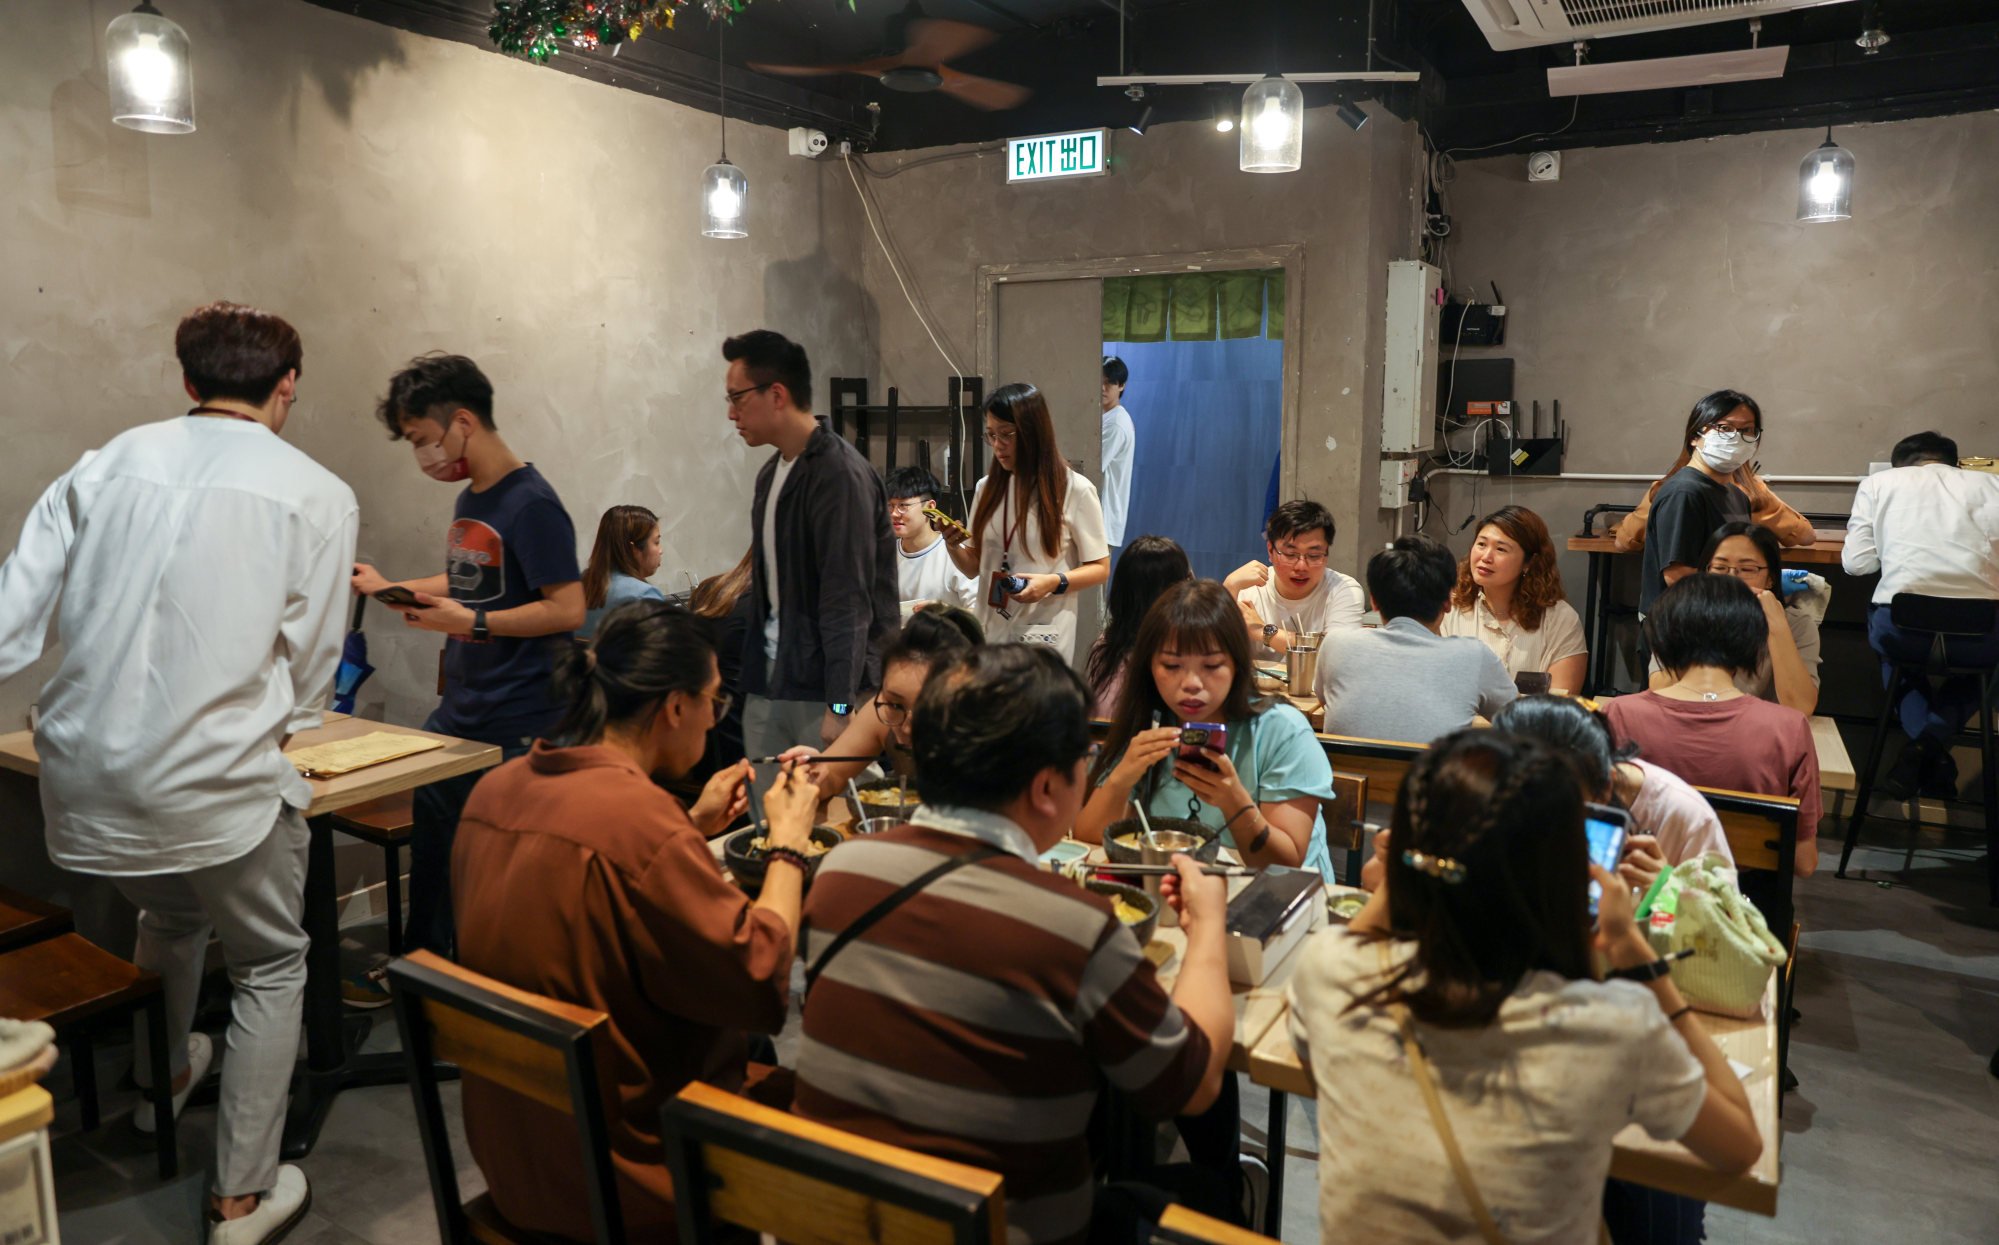 Customers dine at an eatery in Camel Paint Building in Kwun Tong. Photo: Yik Yeung-man